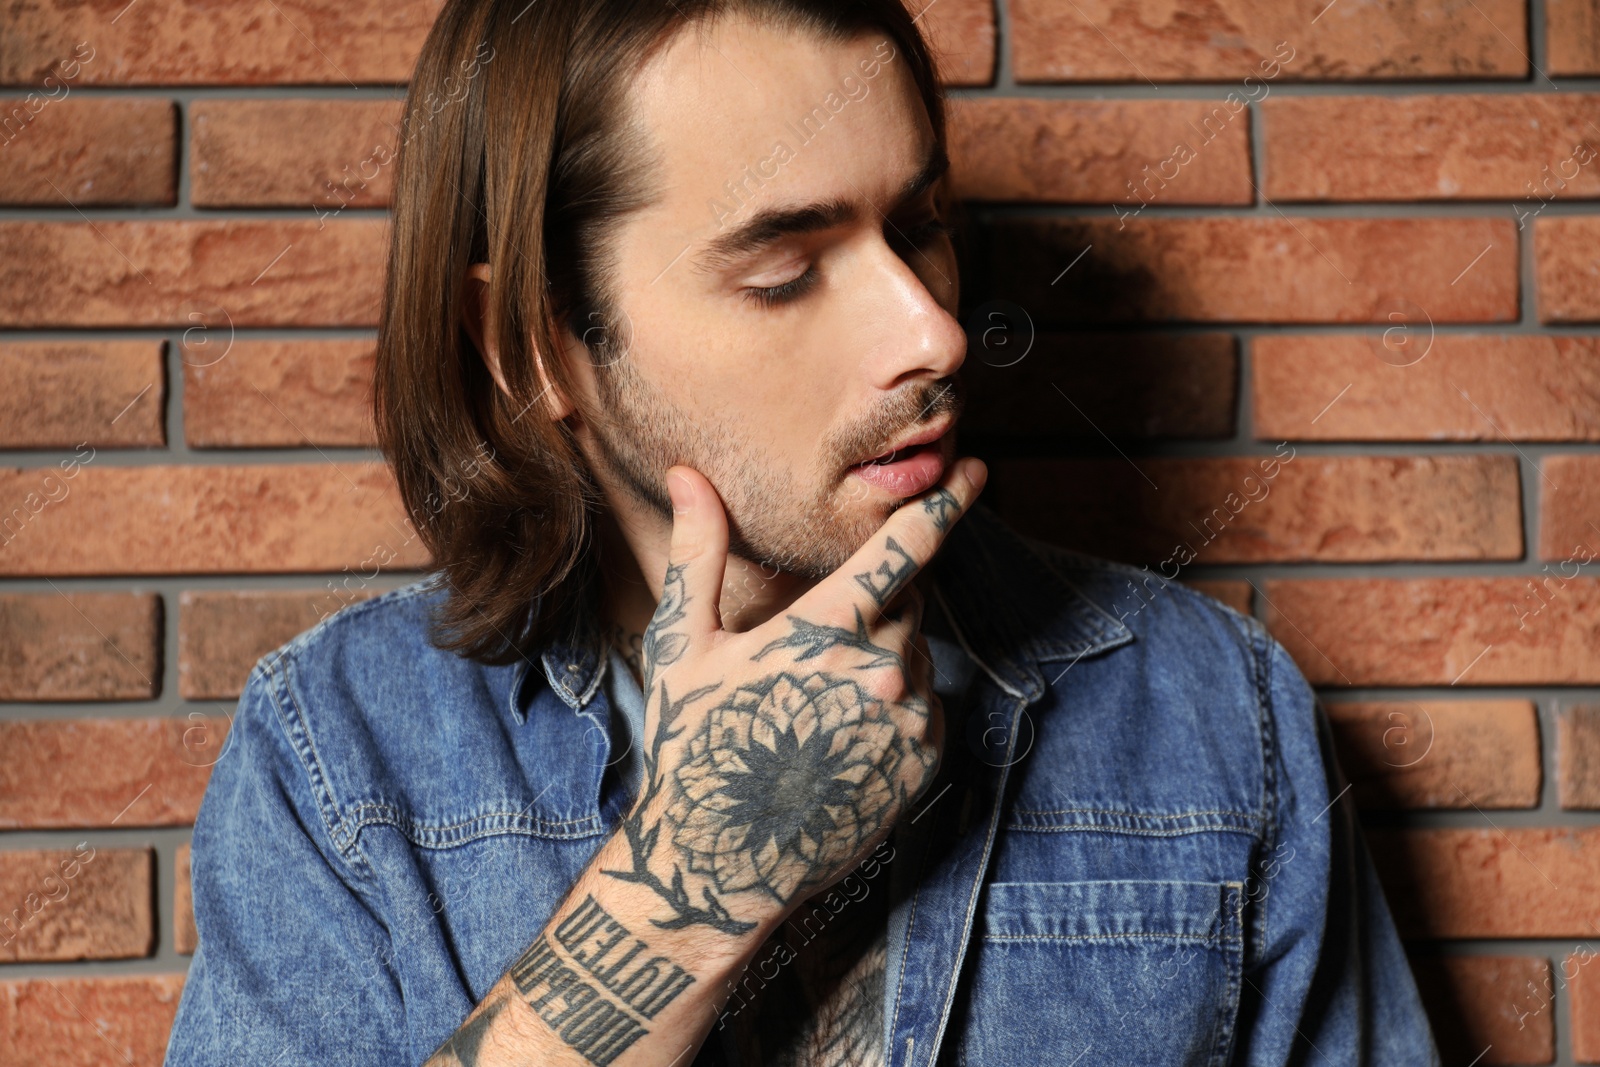 Photo of Young man with tattoos on hand near brick wall